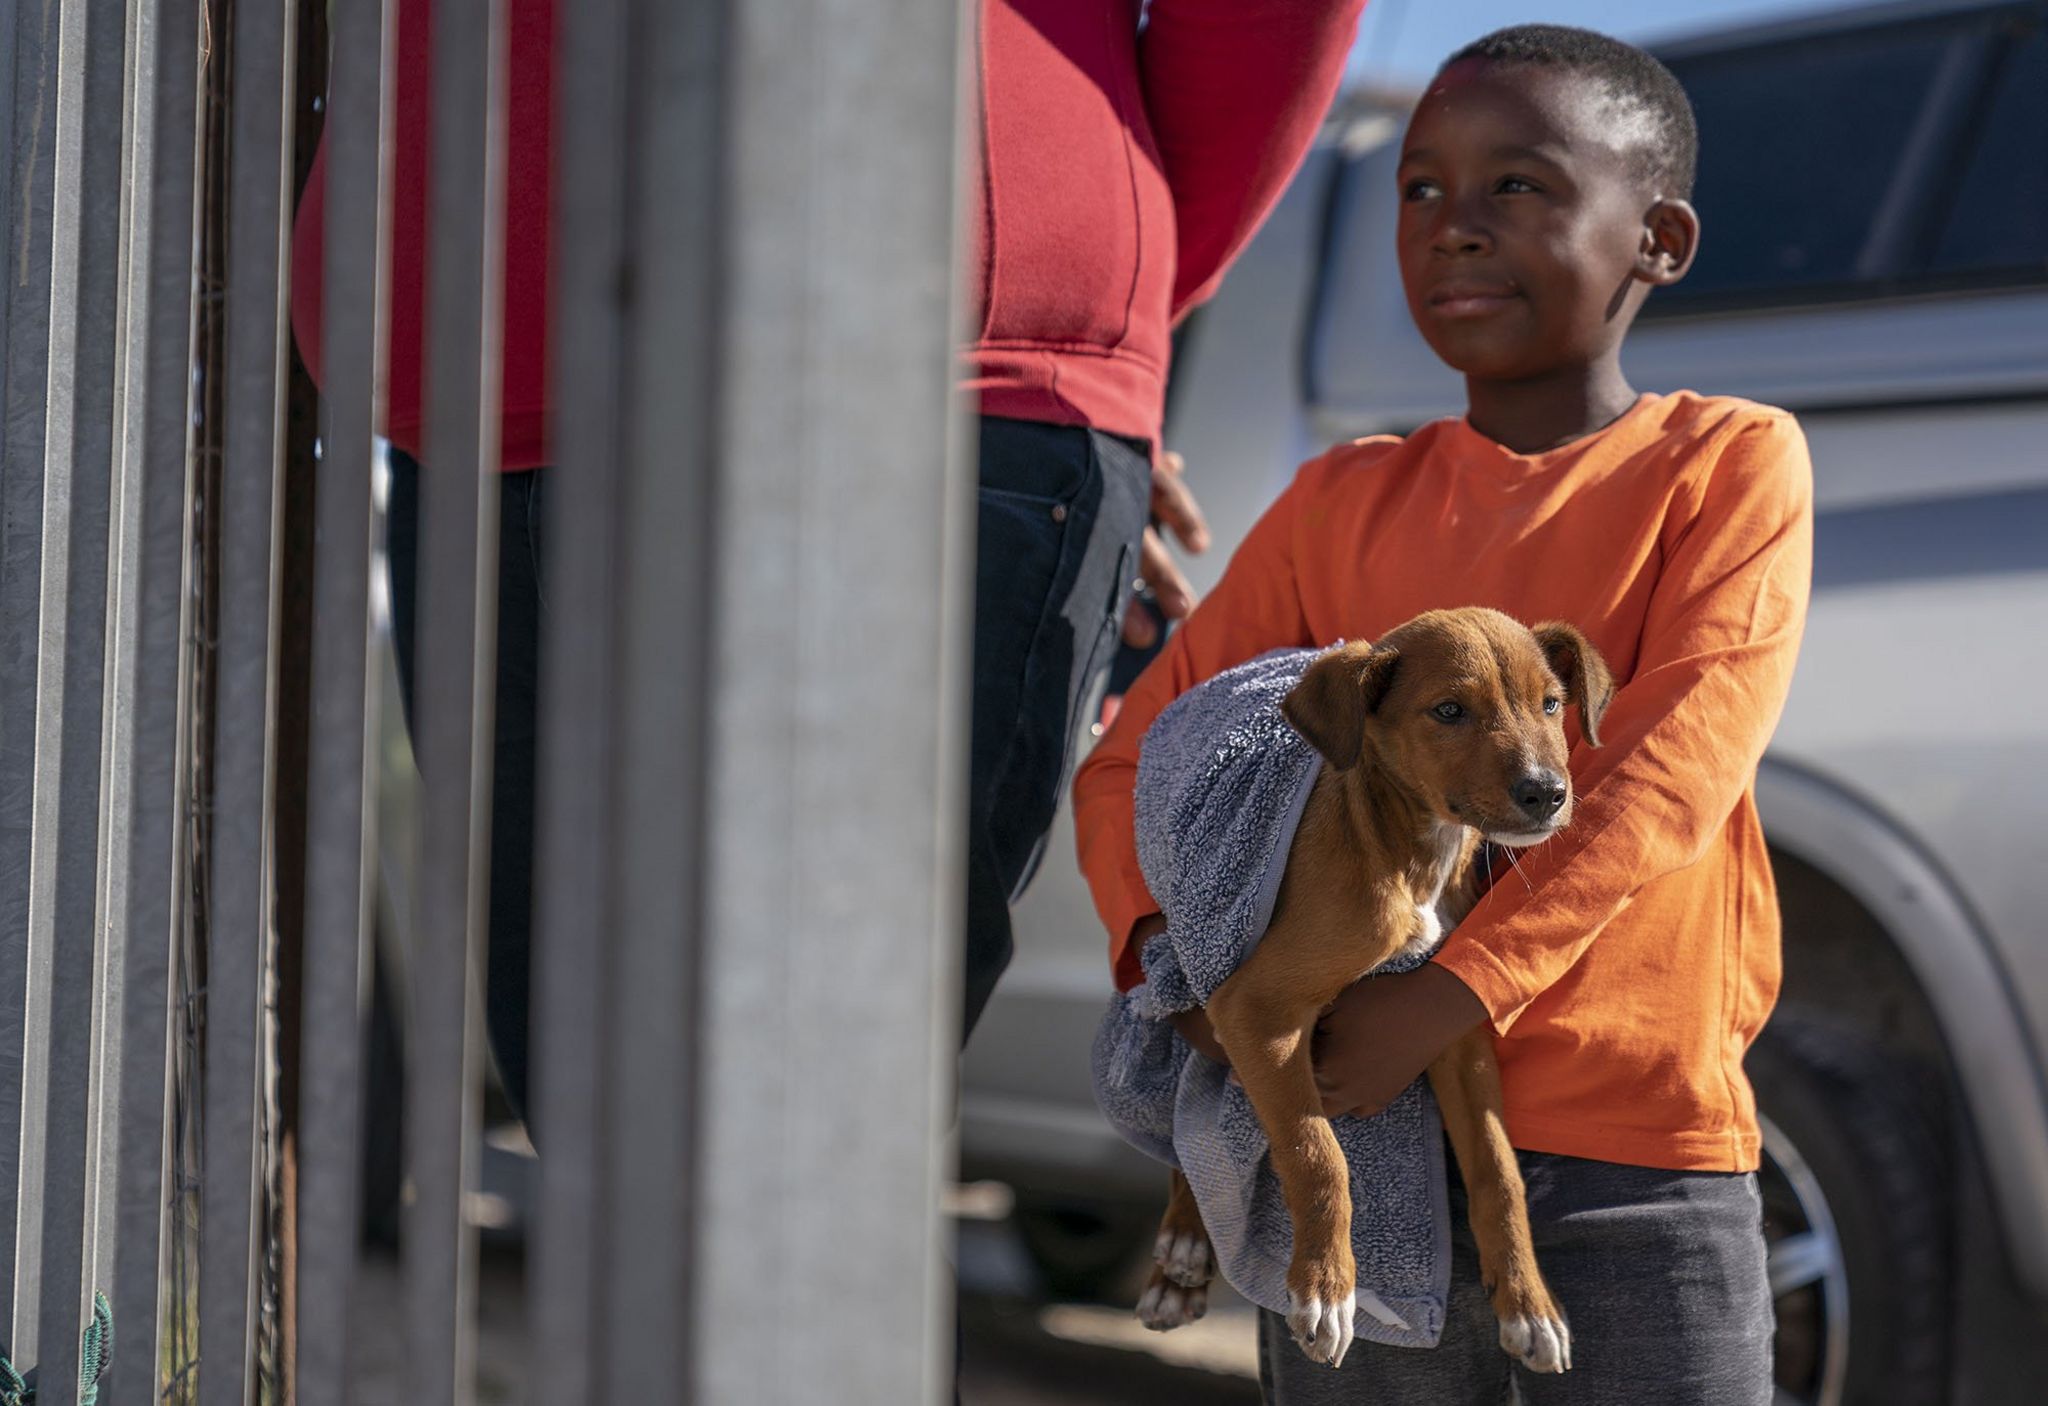 A South African boy waits with his dog to see a Veterinarian outside the Mdzananda Animal Clinic in Khayelitsha, Cape Town, South Africa